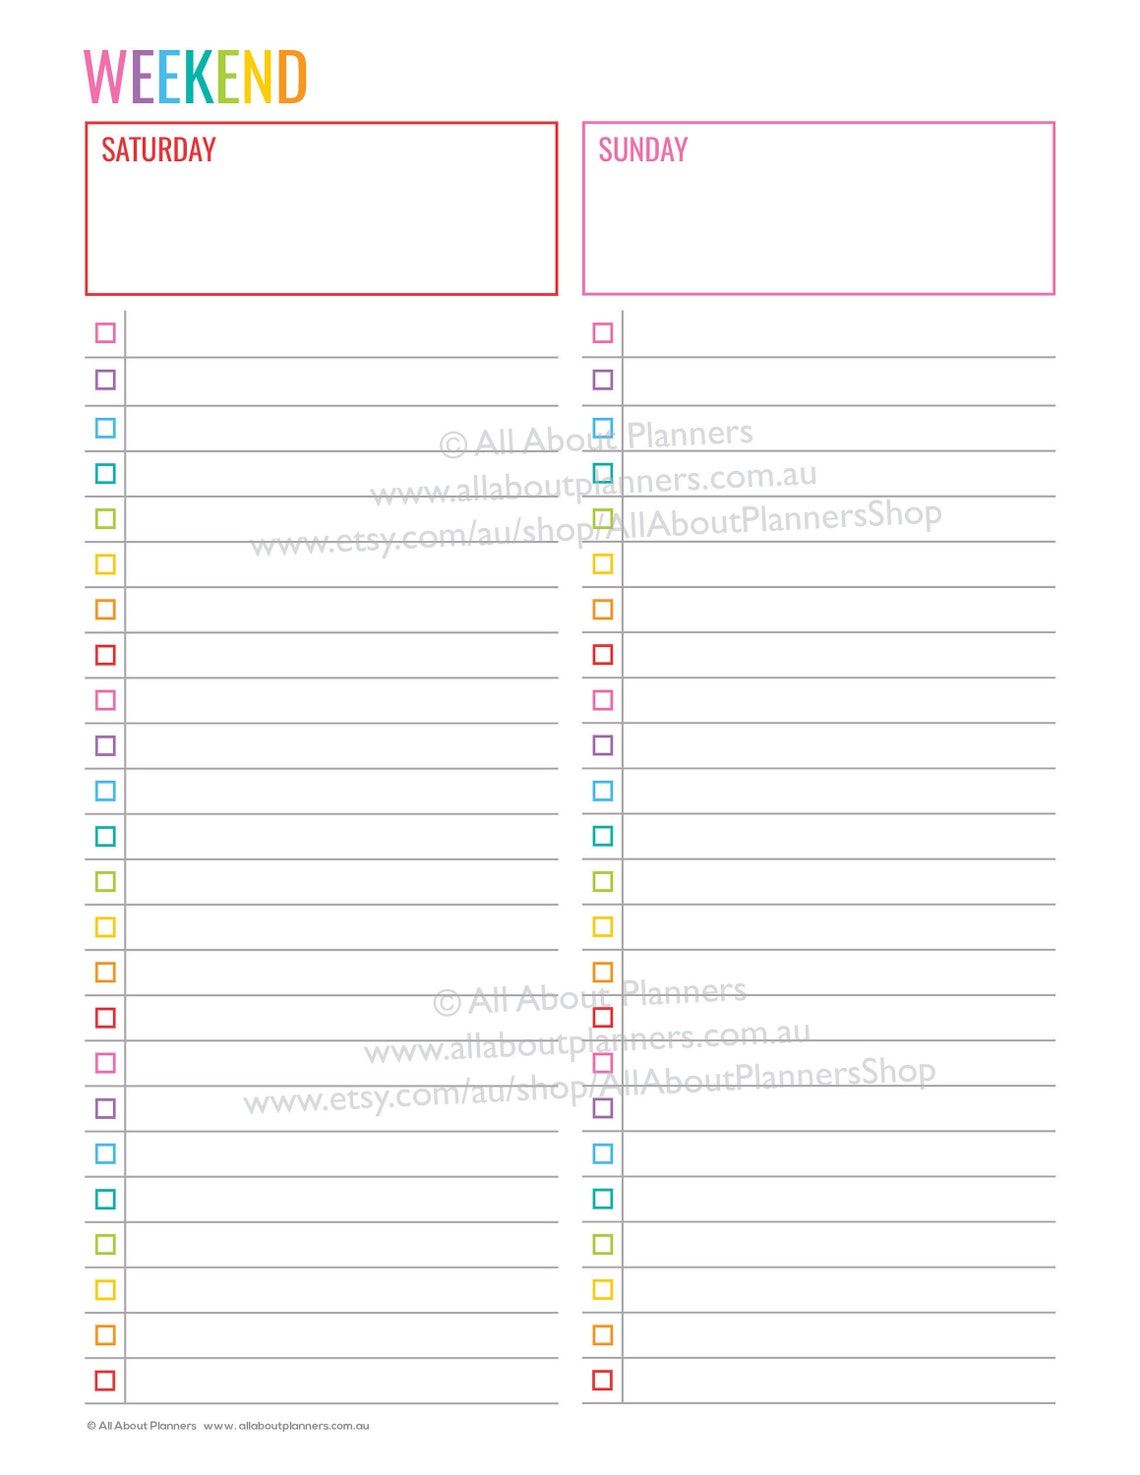 weekend-planner-printable-editable-checklist-cleaning-shopping-etsy